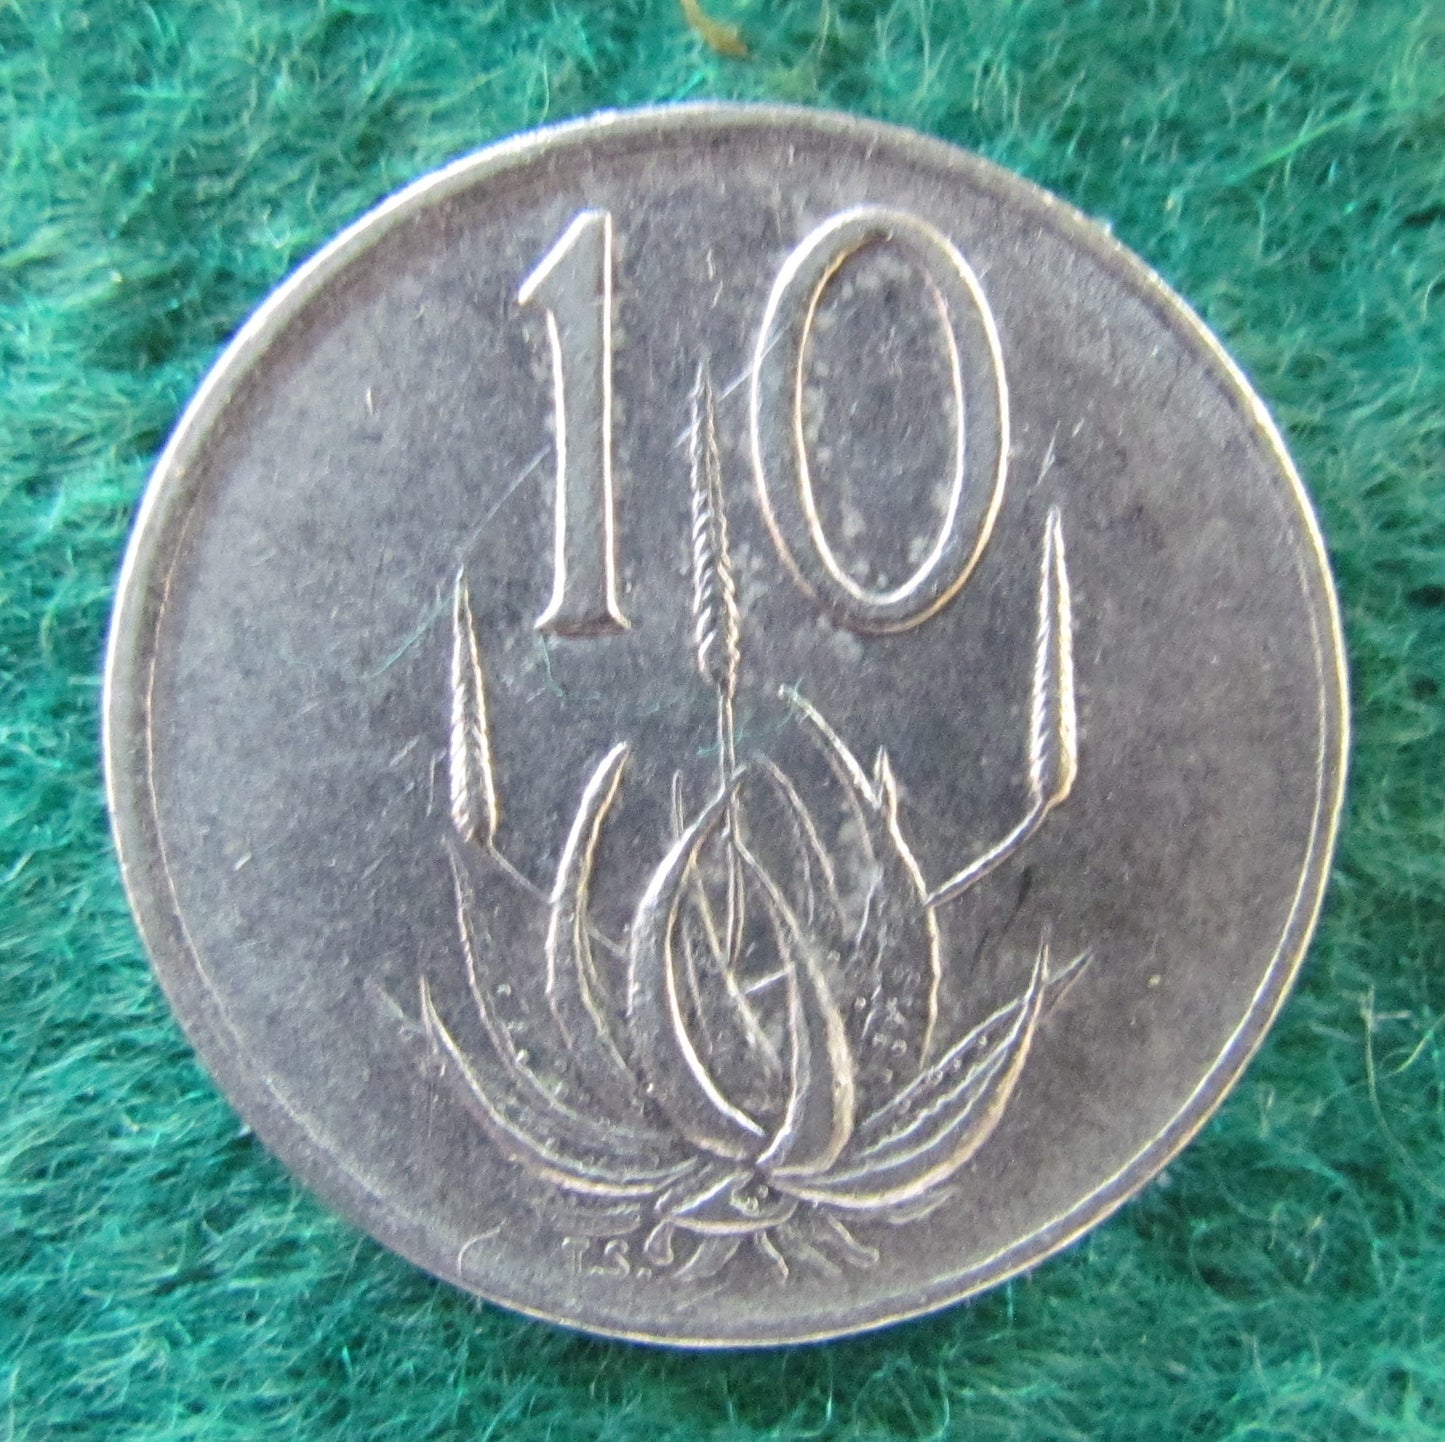 South Africa 1976 10 Cent Coin - Circulated